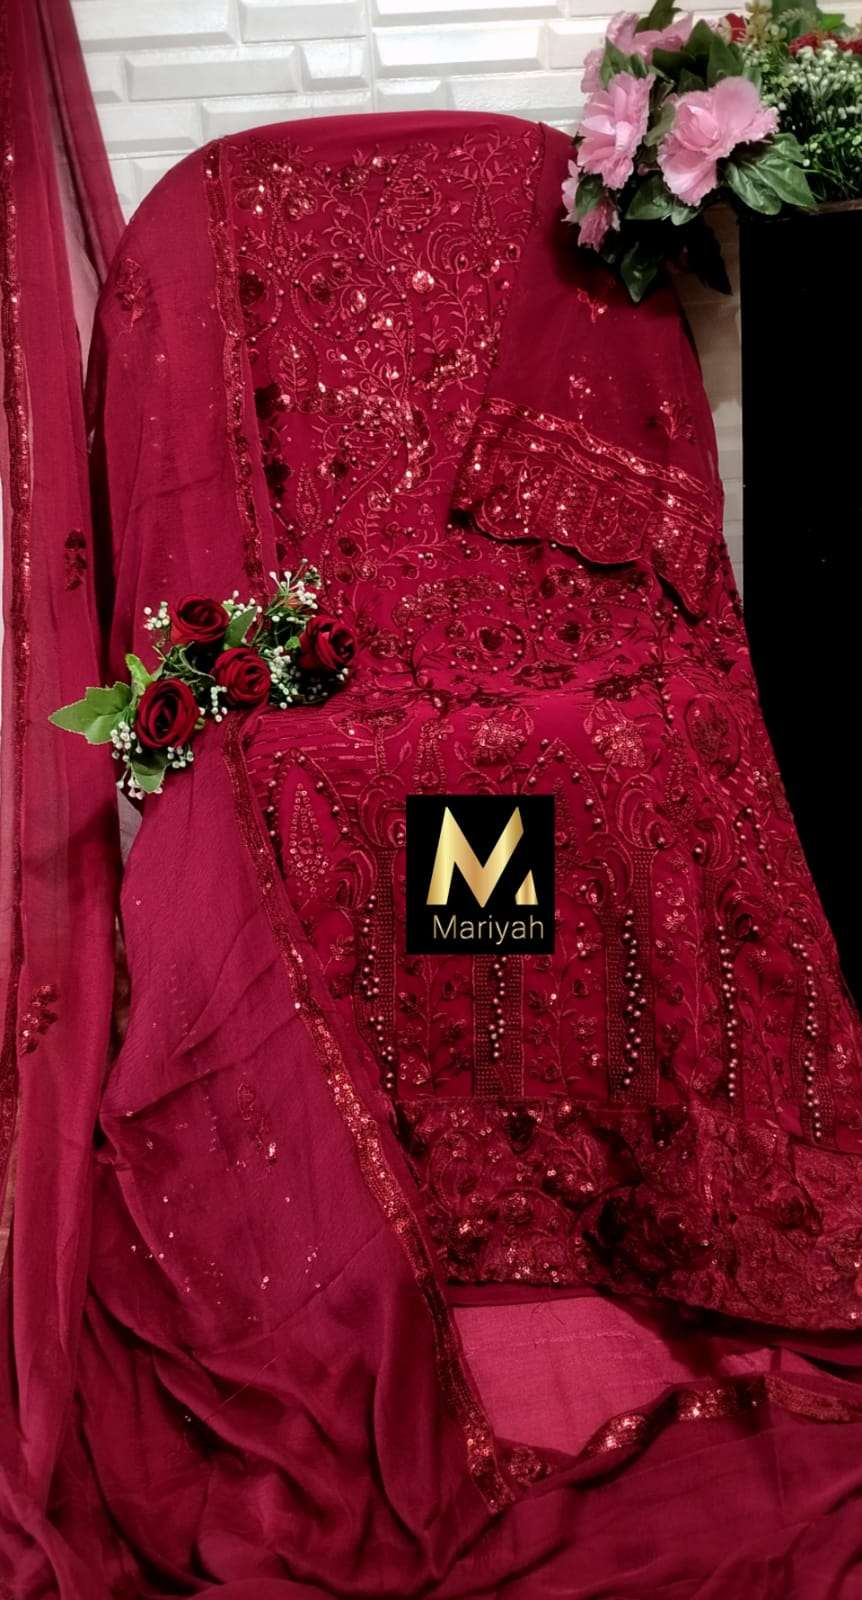 MARIYAH HIT DESIGN M-145 BY MARIYAH BEAUTIFUL PAKISTANI SUITS COLORFUL STYLISH FANCY CASUAL WEAR & ETHNIC WEAR FAUX GEORGETTE EMBROIDERED DRESSES AT WHOLESALE PRICE